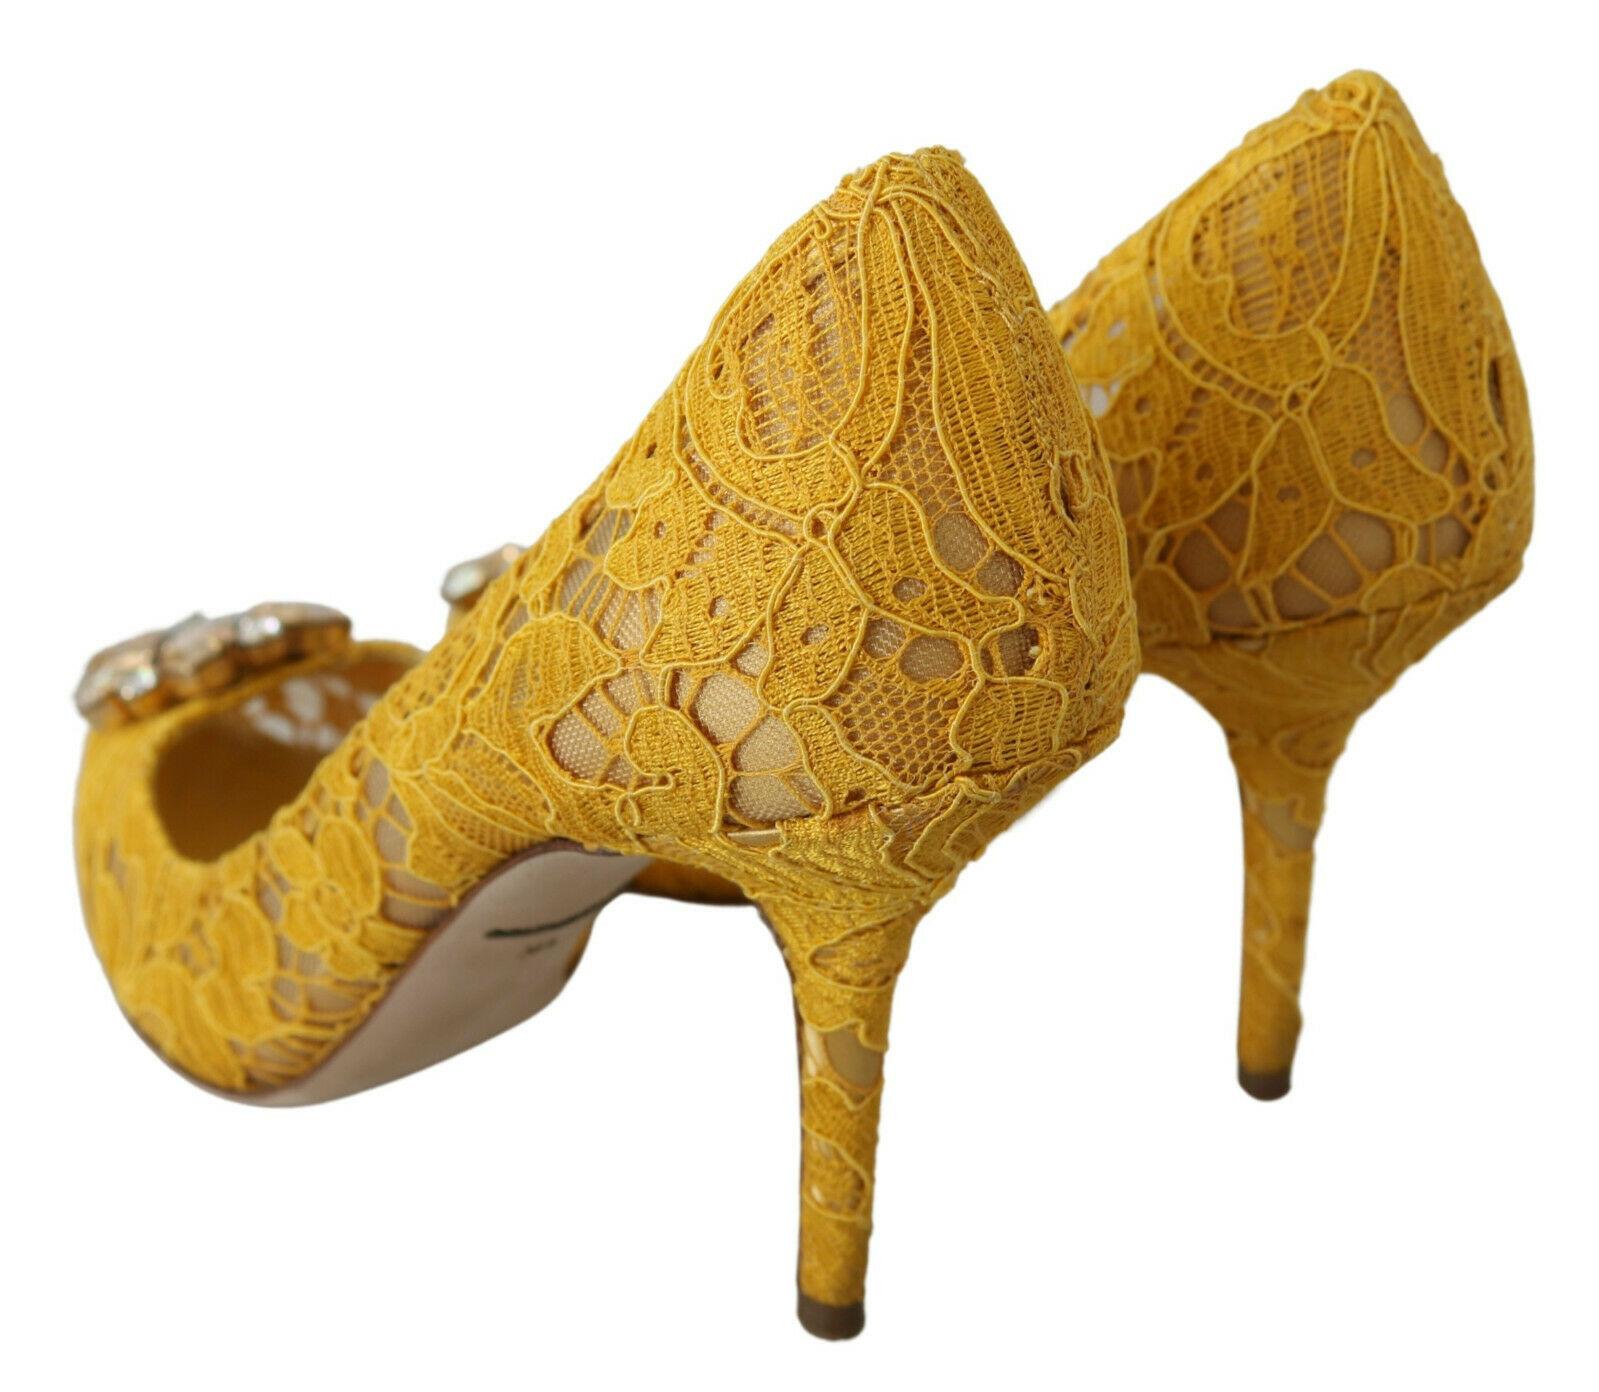 Dolce & Gabbana Yellow Lace Pointy Pumps Heels Shoes Floral Jewel Leather 1